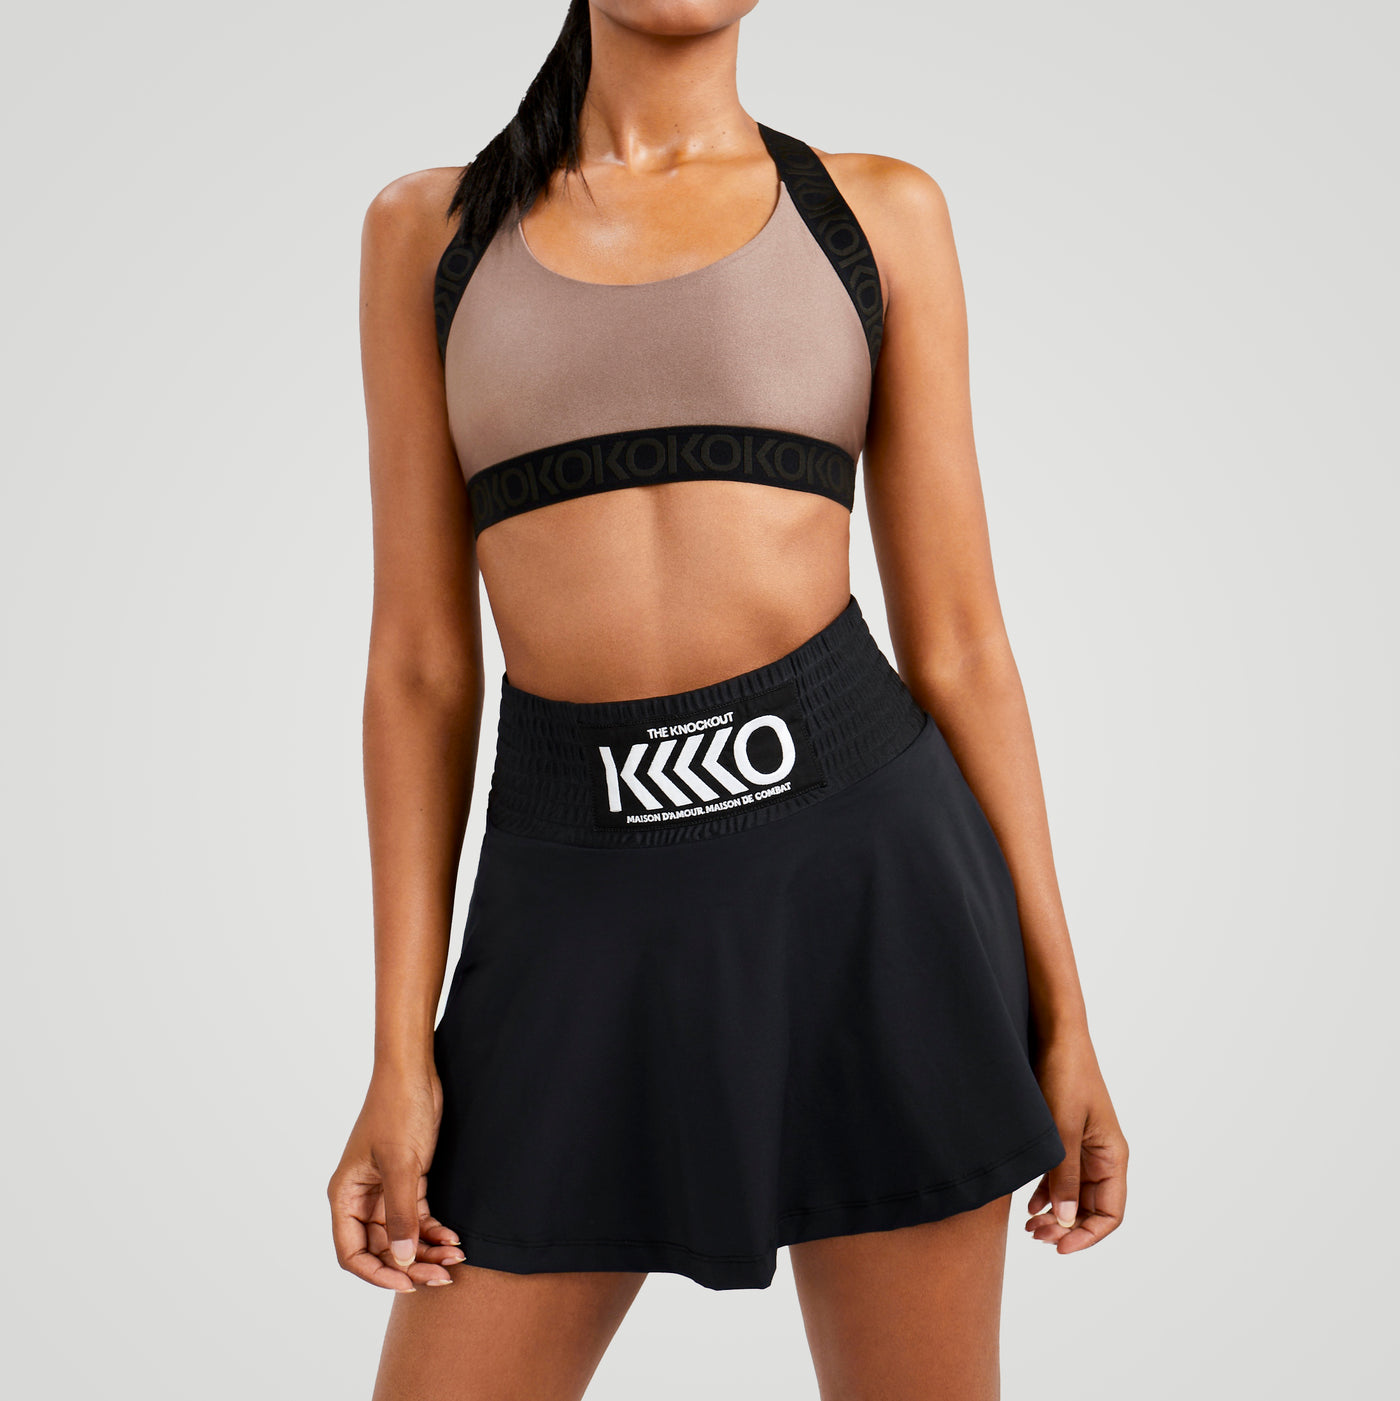 Fighting skirt outfit & sports bra